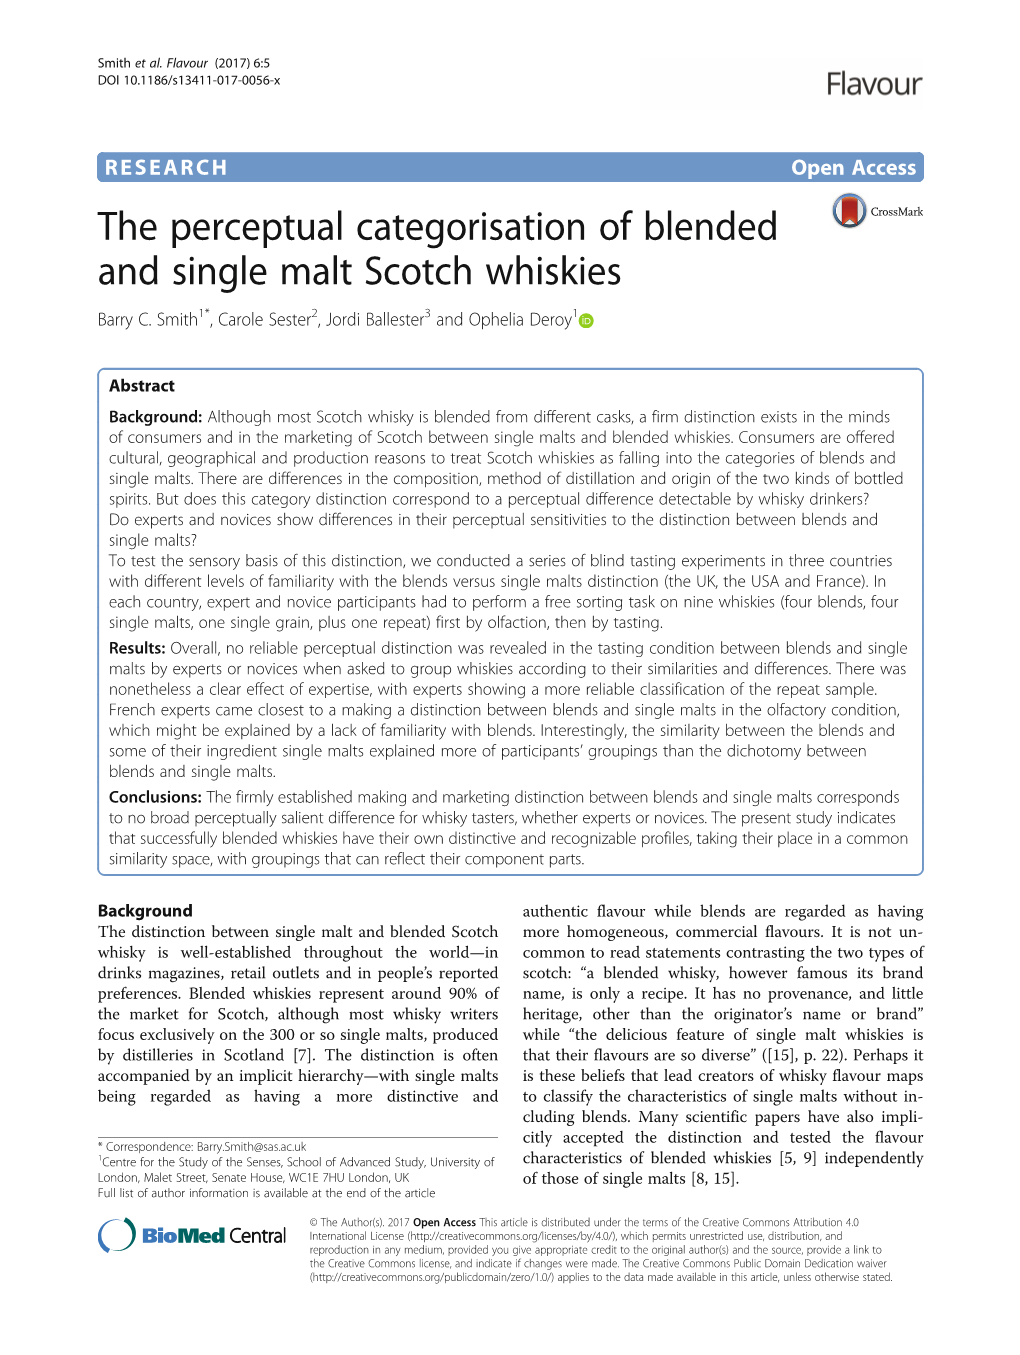 The Perceptual Categorisation of Blended and Single Malt Scotch Whiskies Barry C